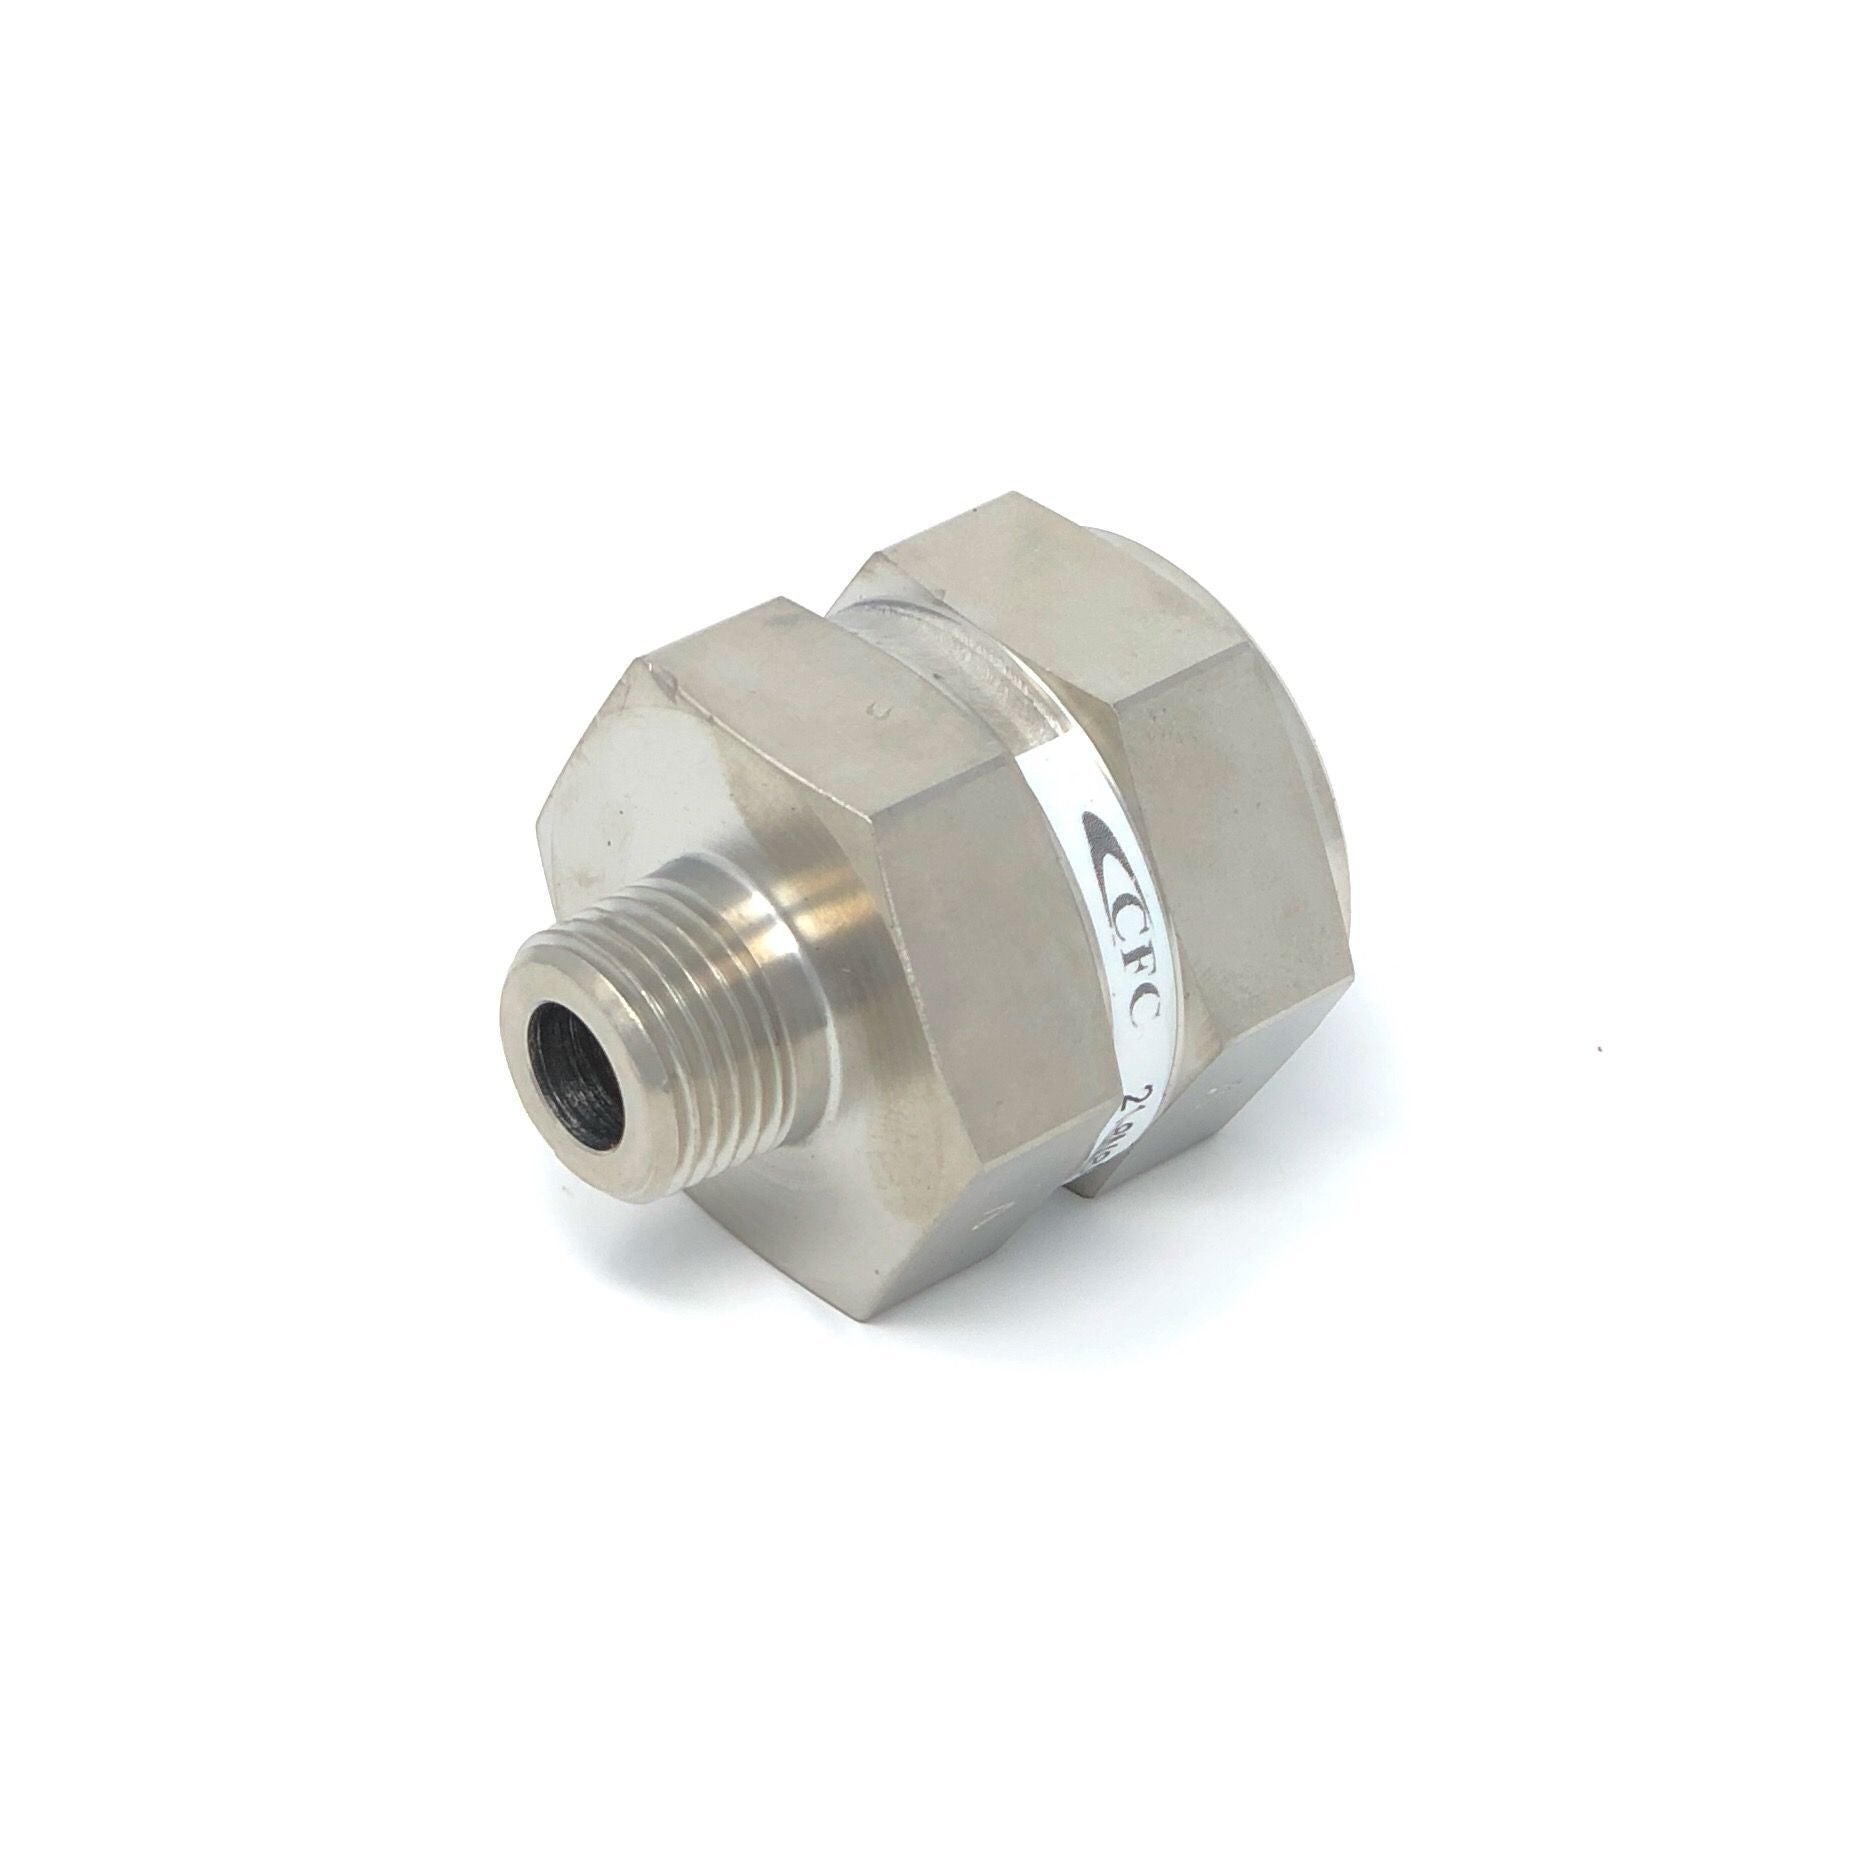 21-6S6S-25S : Chase High Pressure Inline Filter, 6000psi, #6 SAE (3/8") , 25 Micron, No Visual Indicator, No Bypass